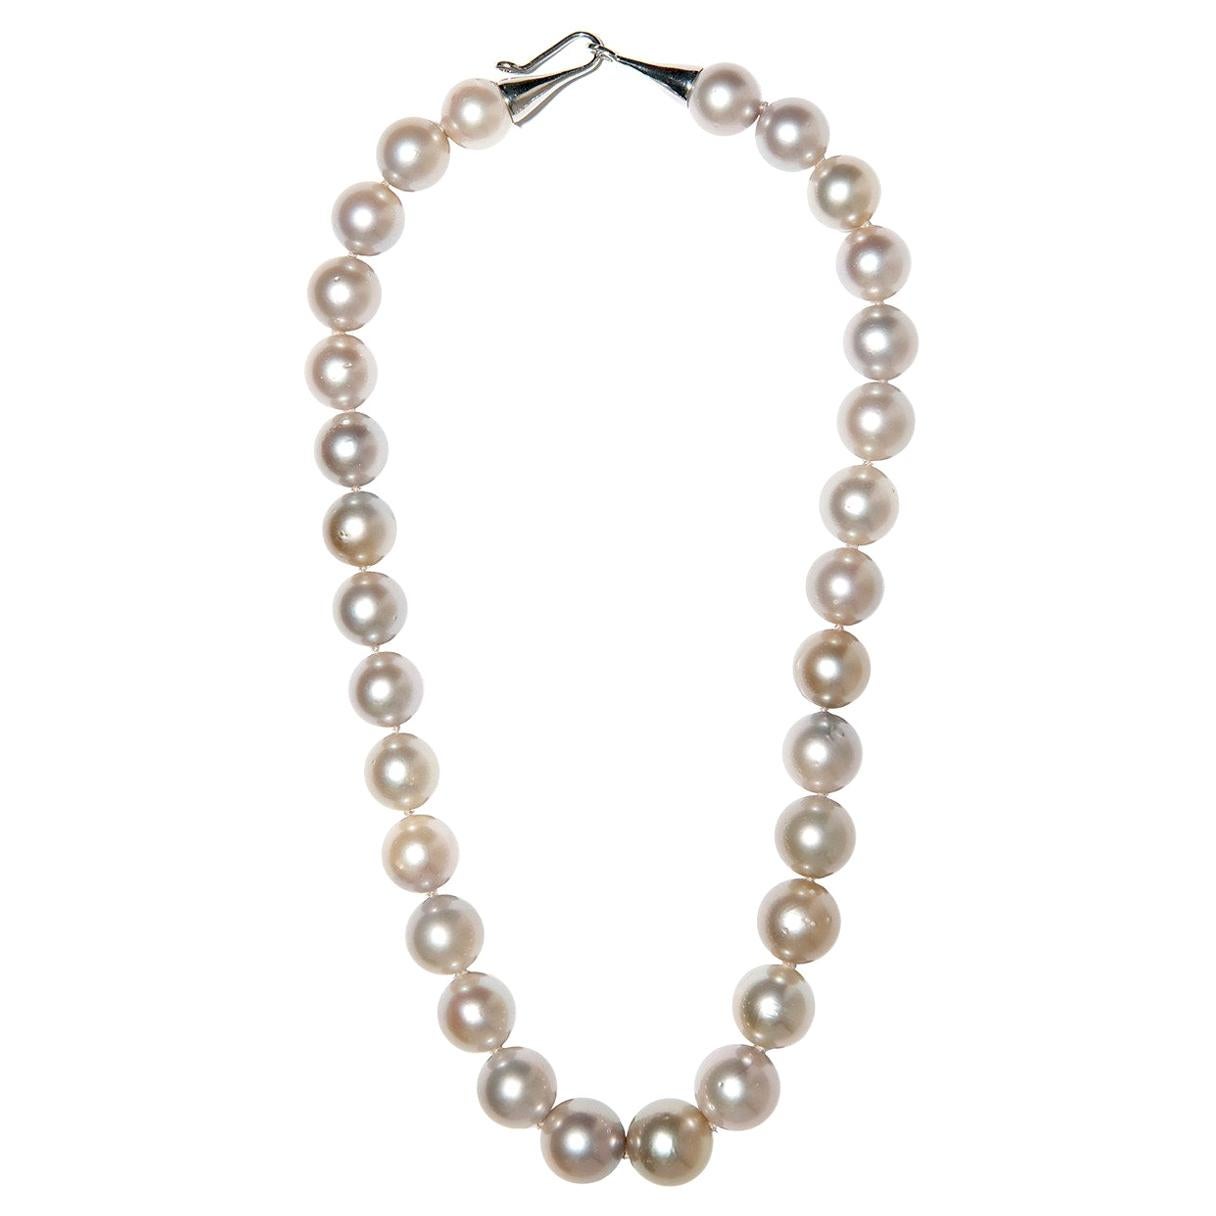 Large Round South Sea Pearl Necklace with Platinum Cone Hk-and-Eye